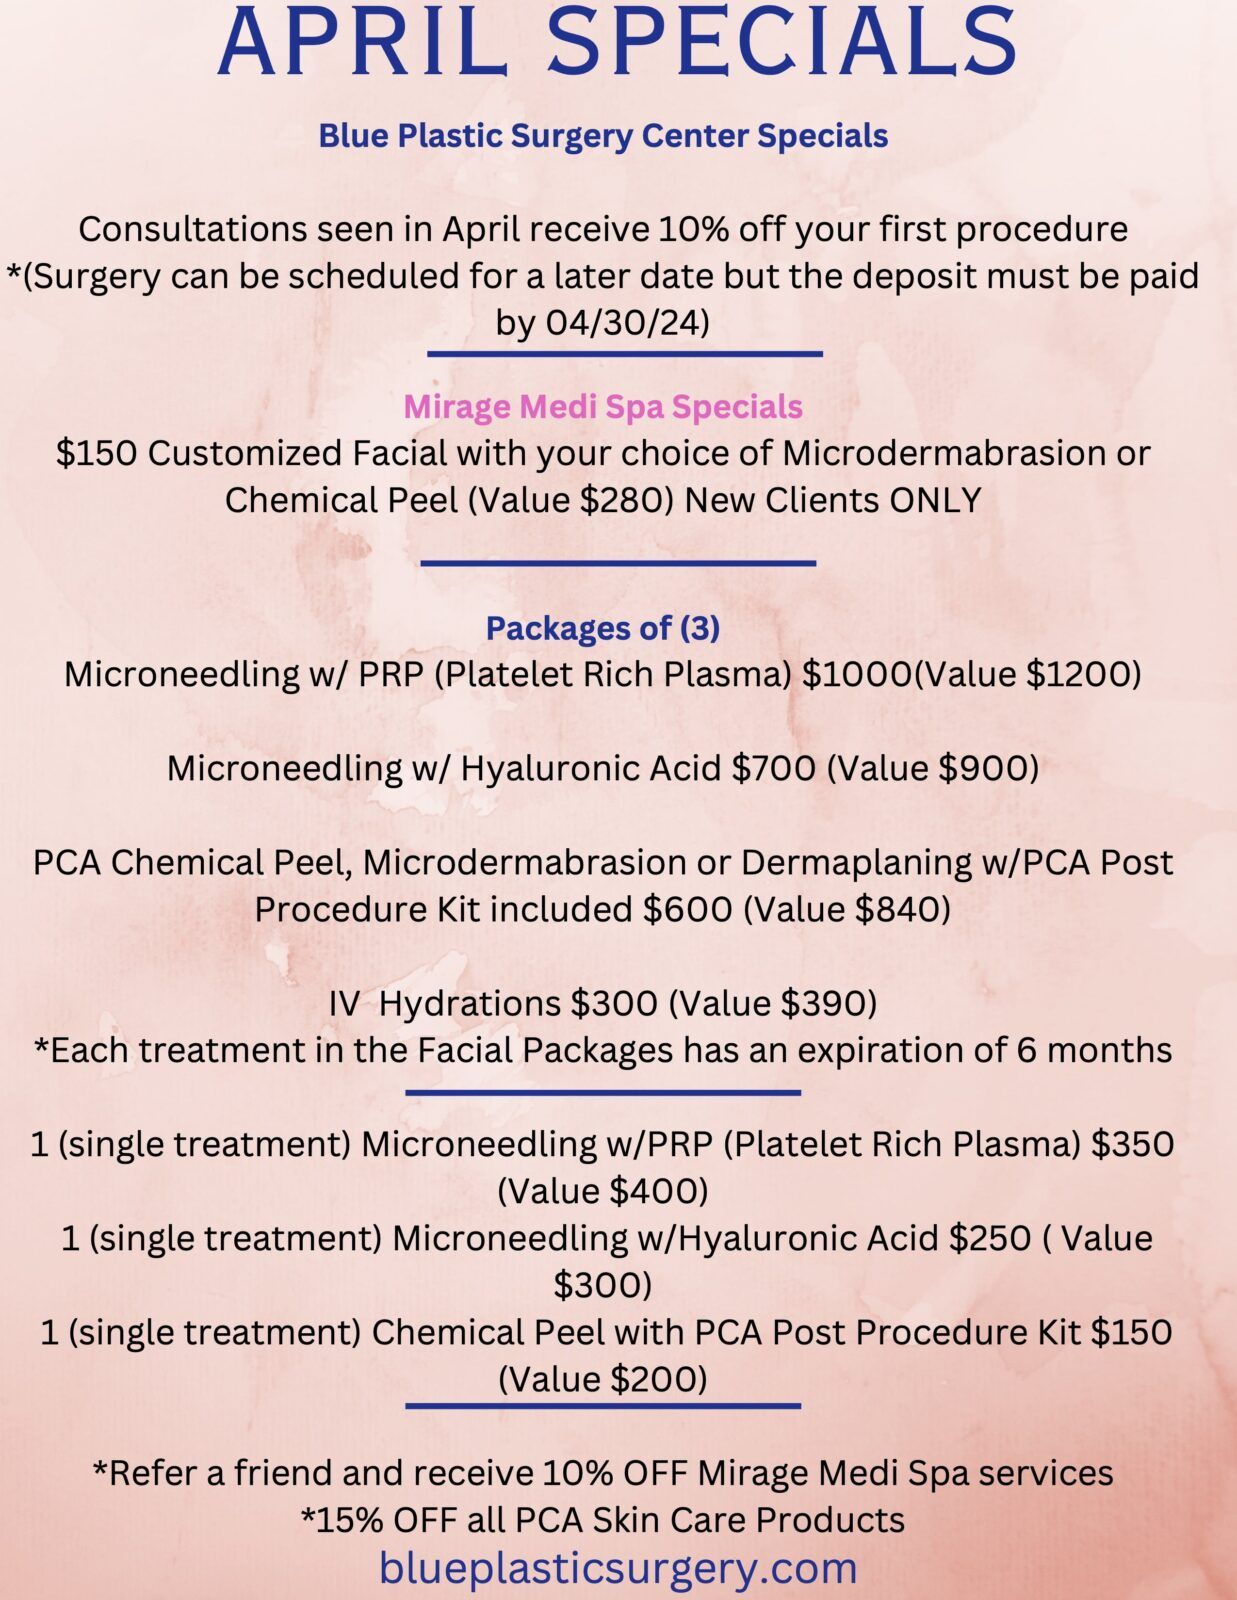 April Special Blue Plastic Surgery Center Specials 10% off your firs procedure,